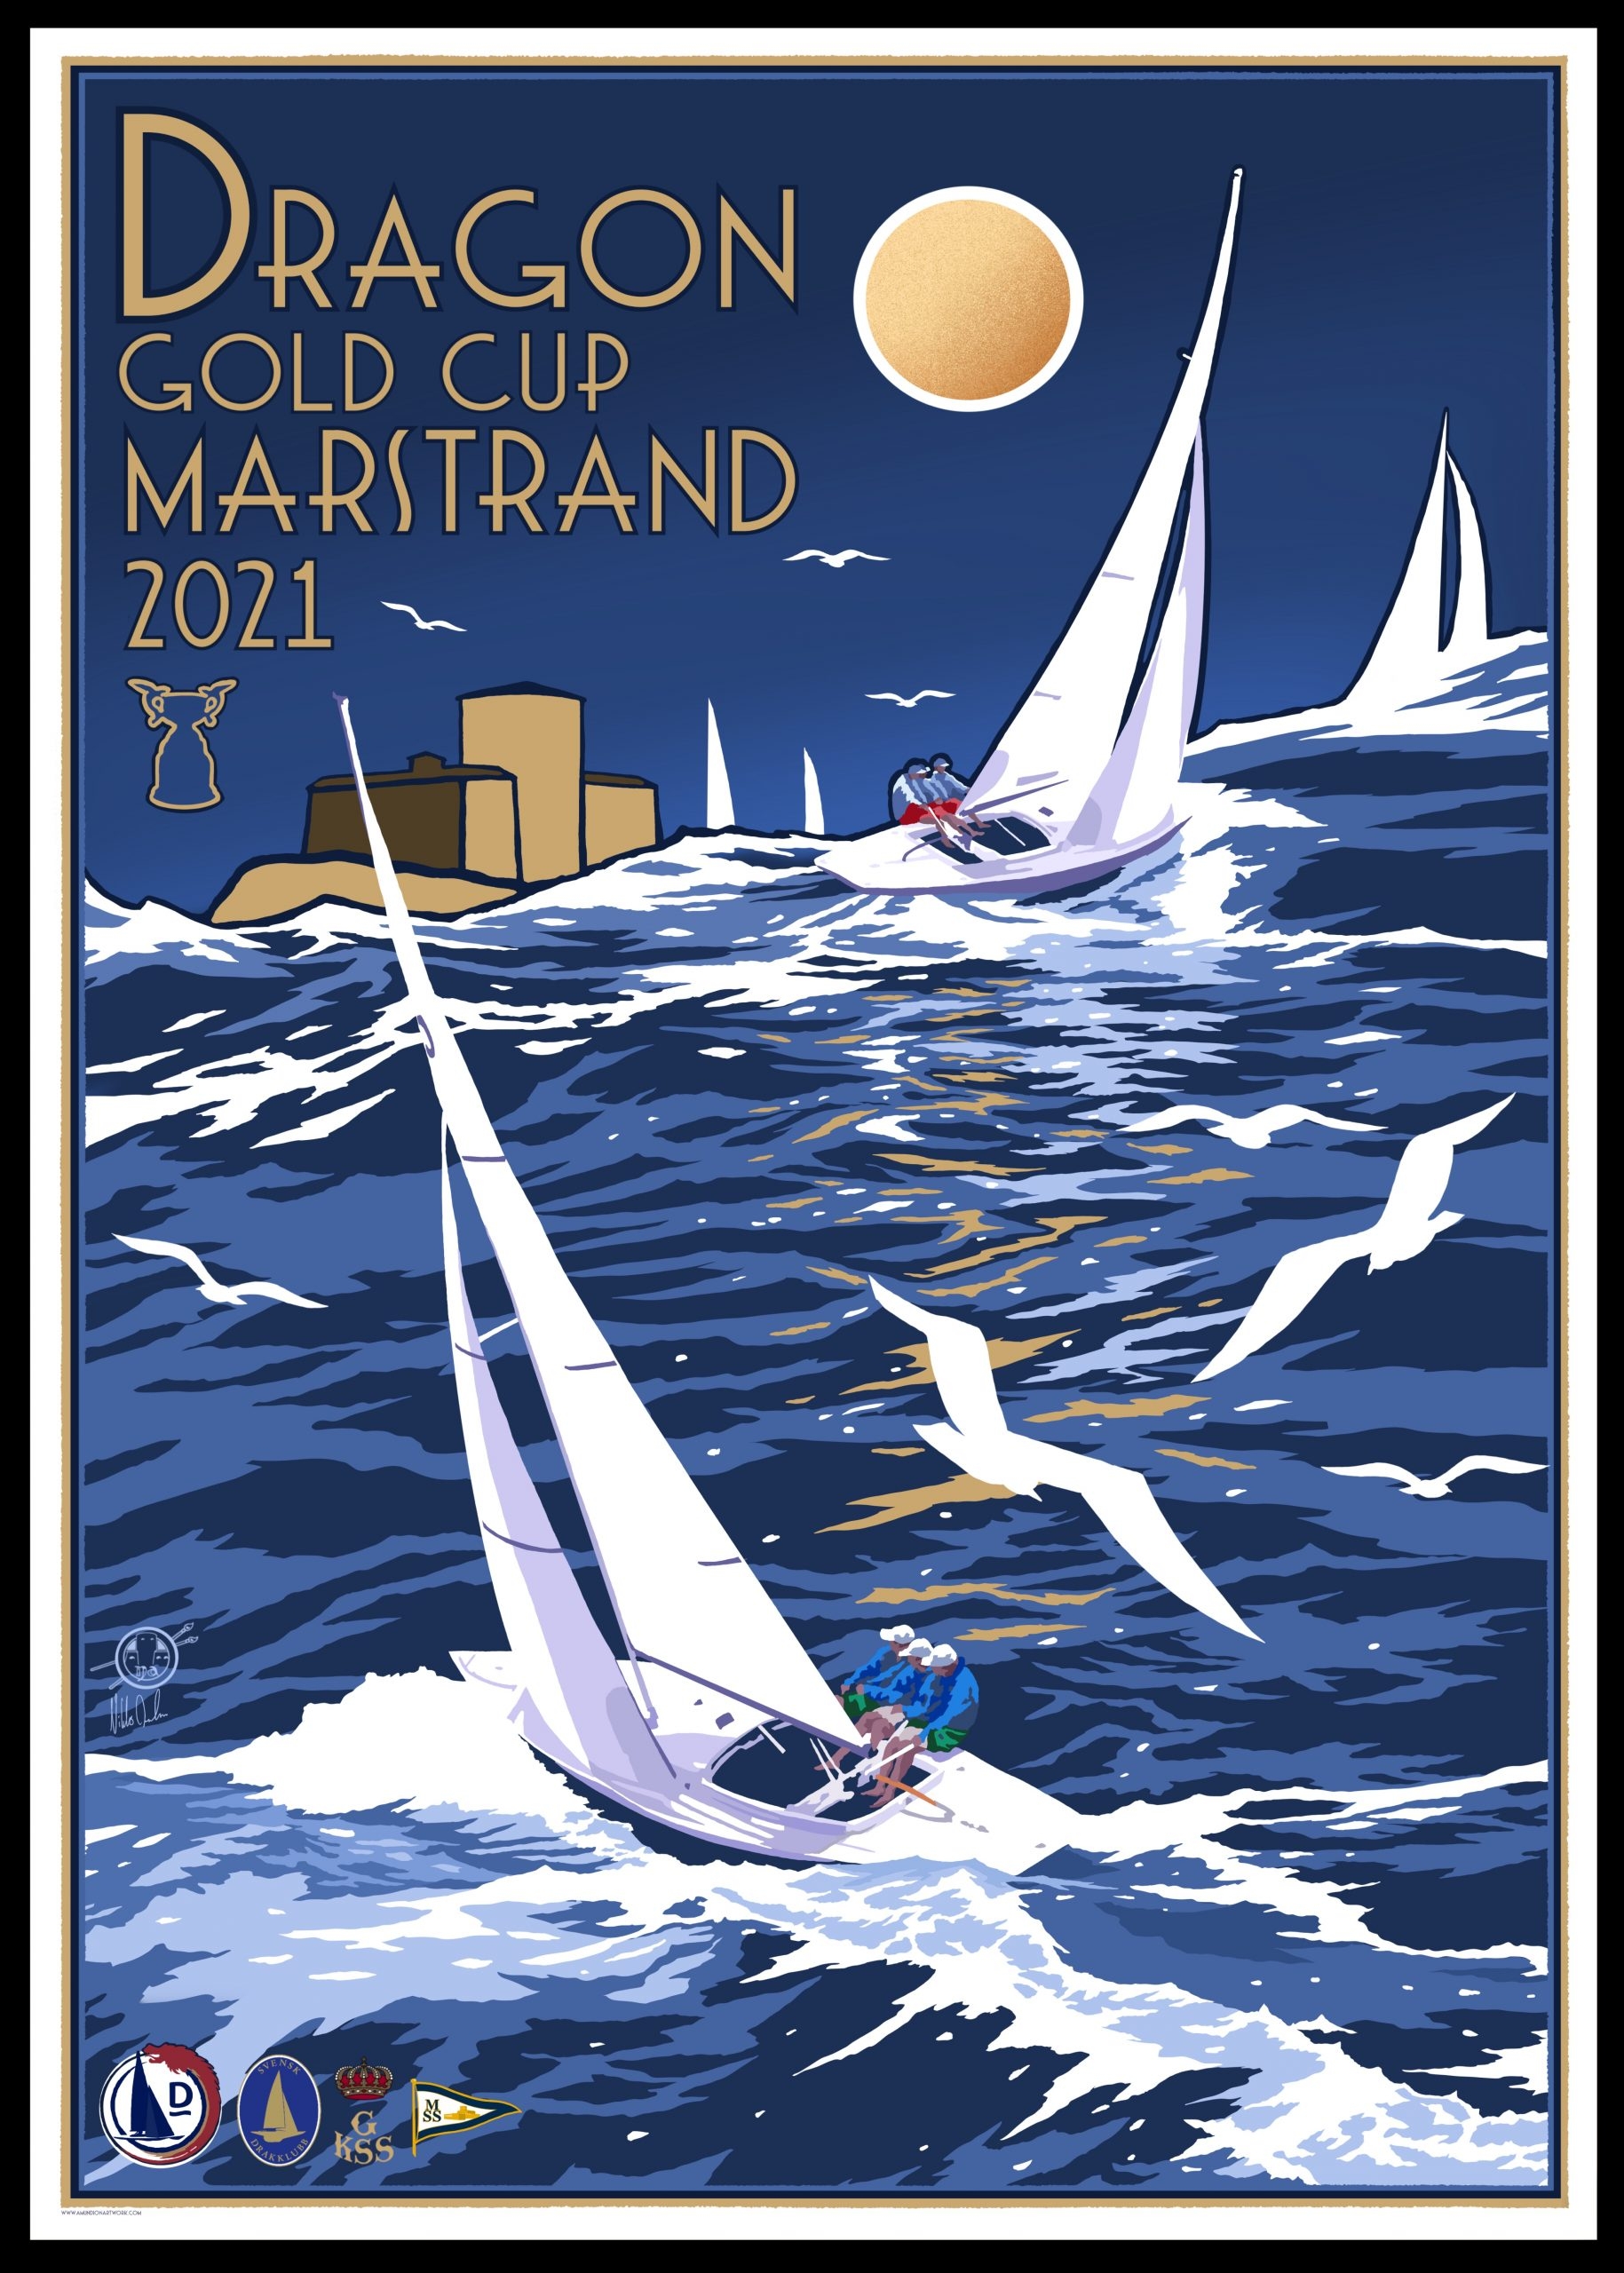  Dragon  Gold Cup 2021  Marstrand SWE  Day 3  Trois jours sans vent !